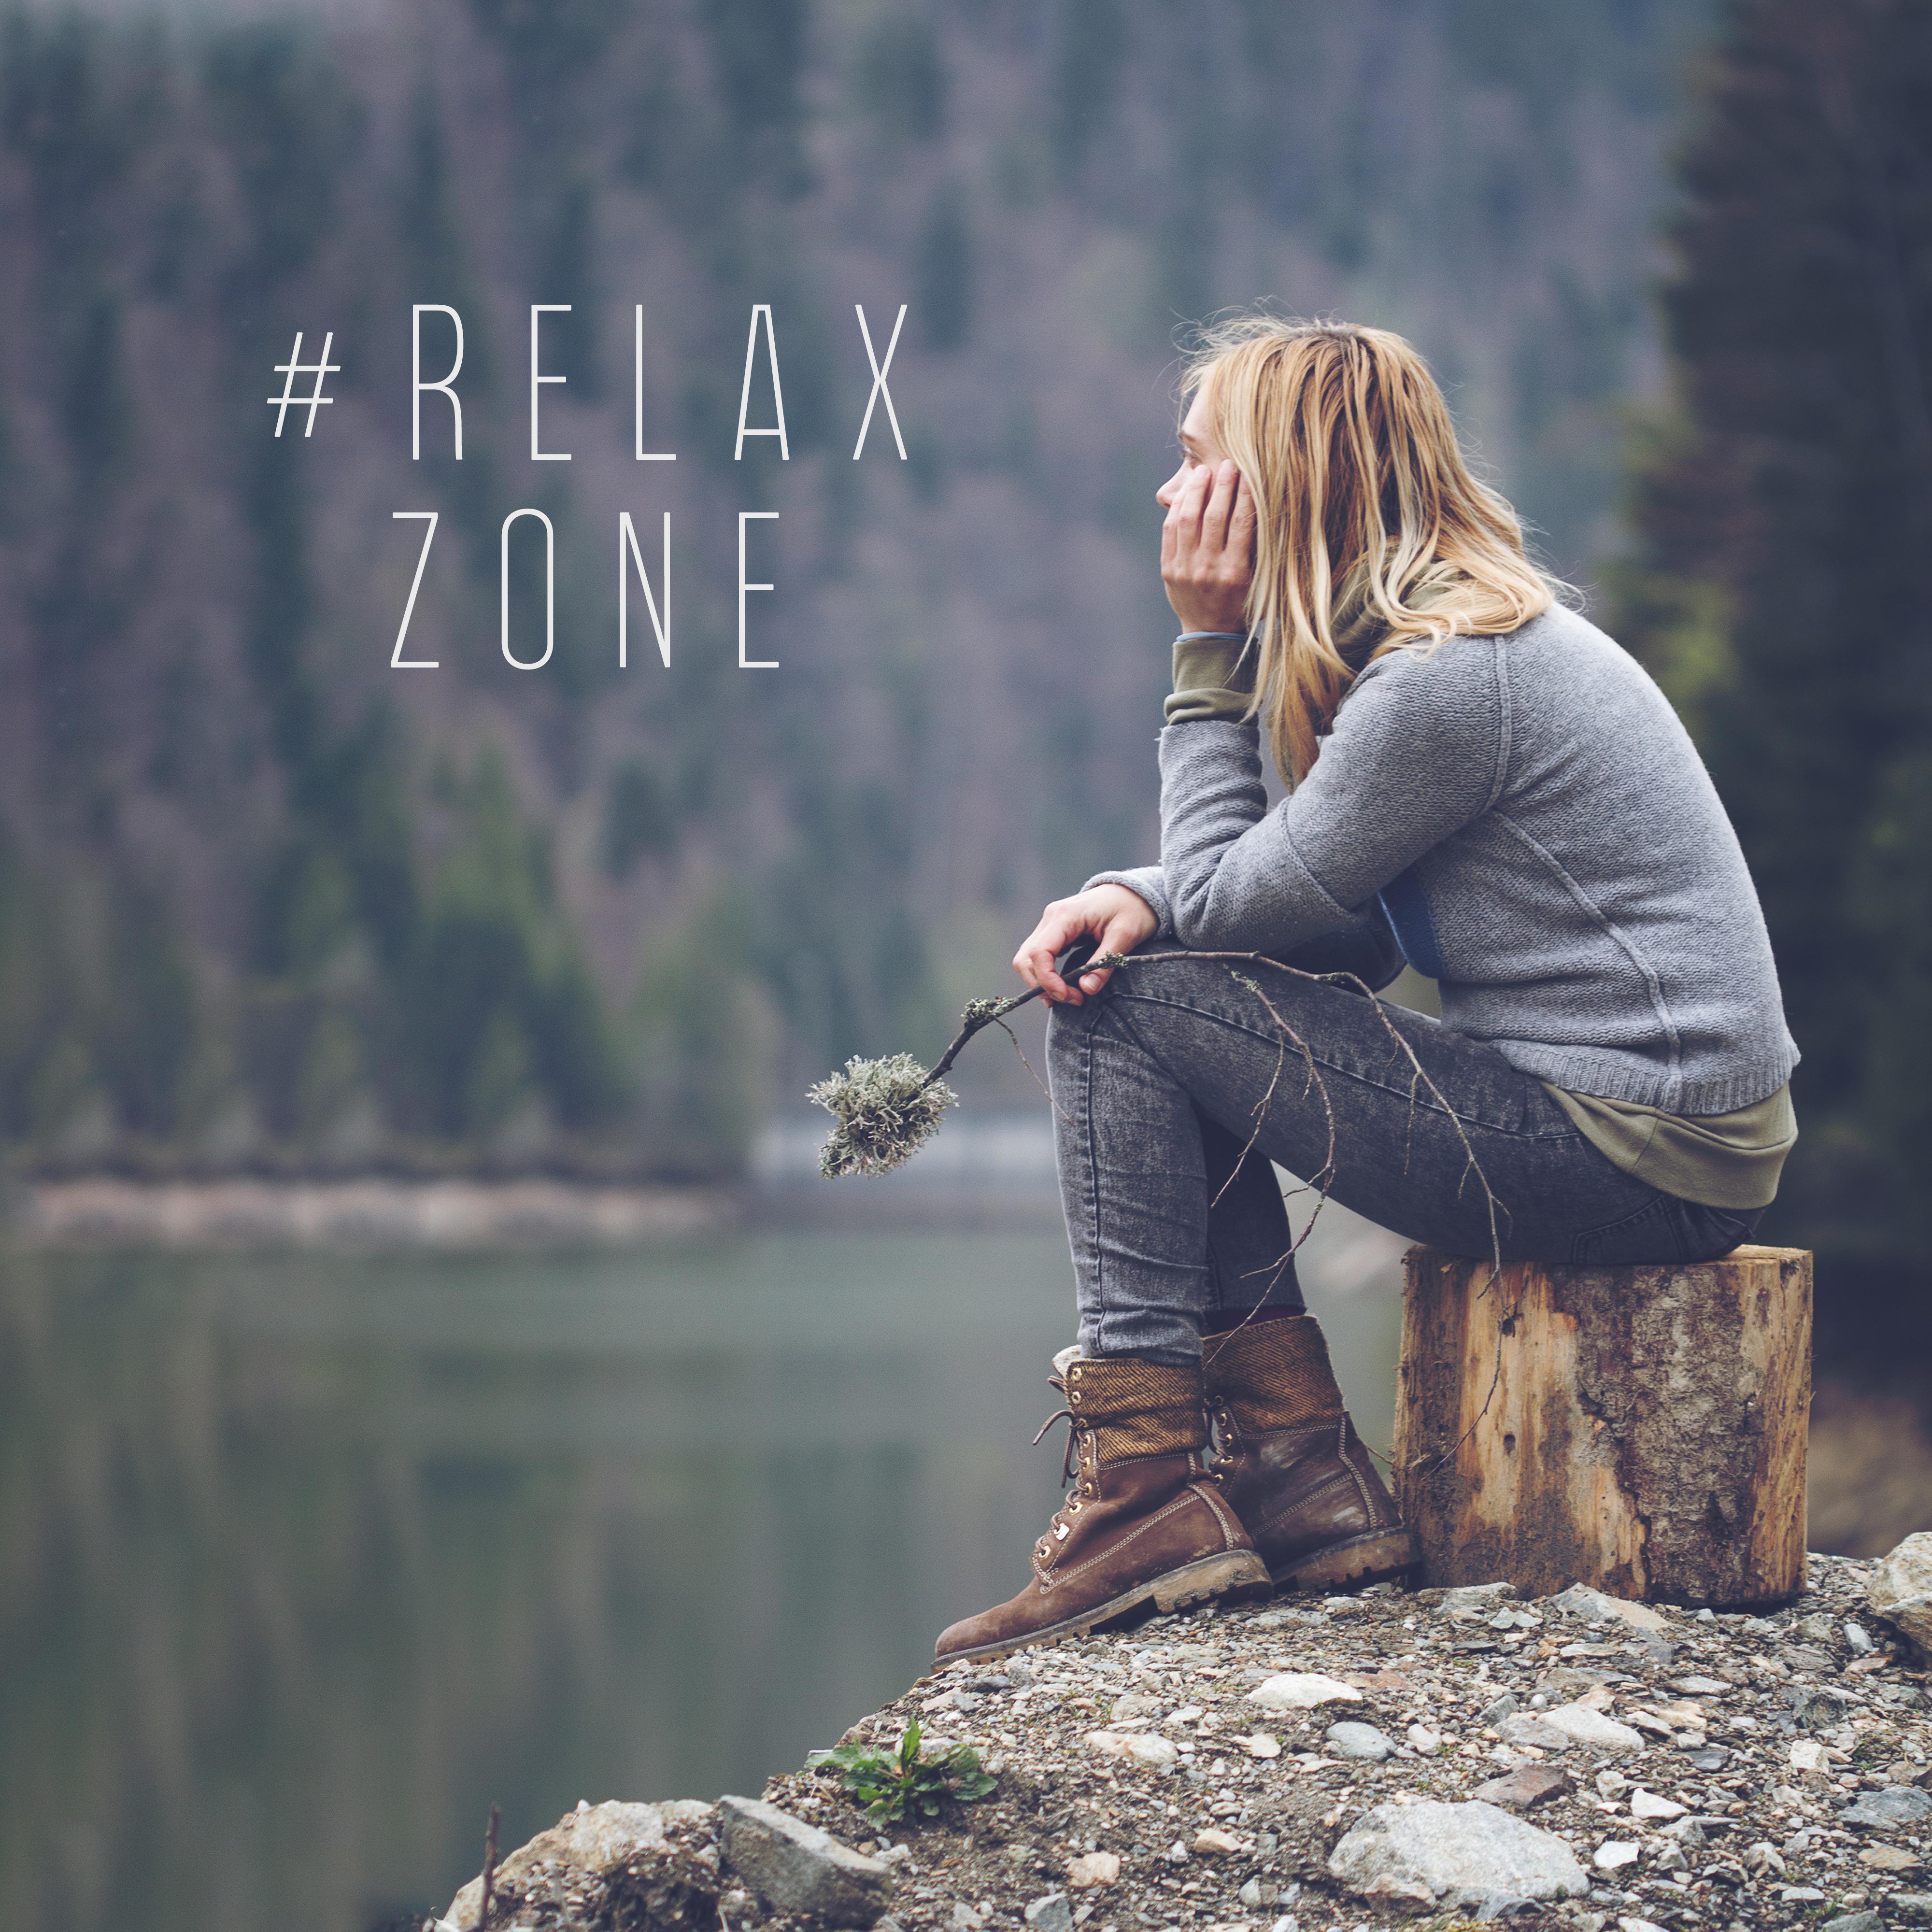 #Relax Zone – Meditation Music for Relaxation, Clearer Mind, Healing Relaxing Meditation, Zen Vibrations, Yoga Music 2019, Meditation Therapy, New Age Music